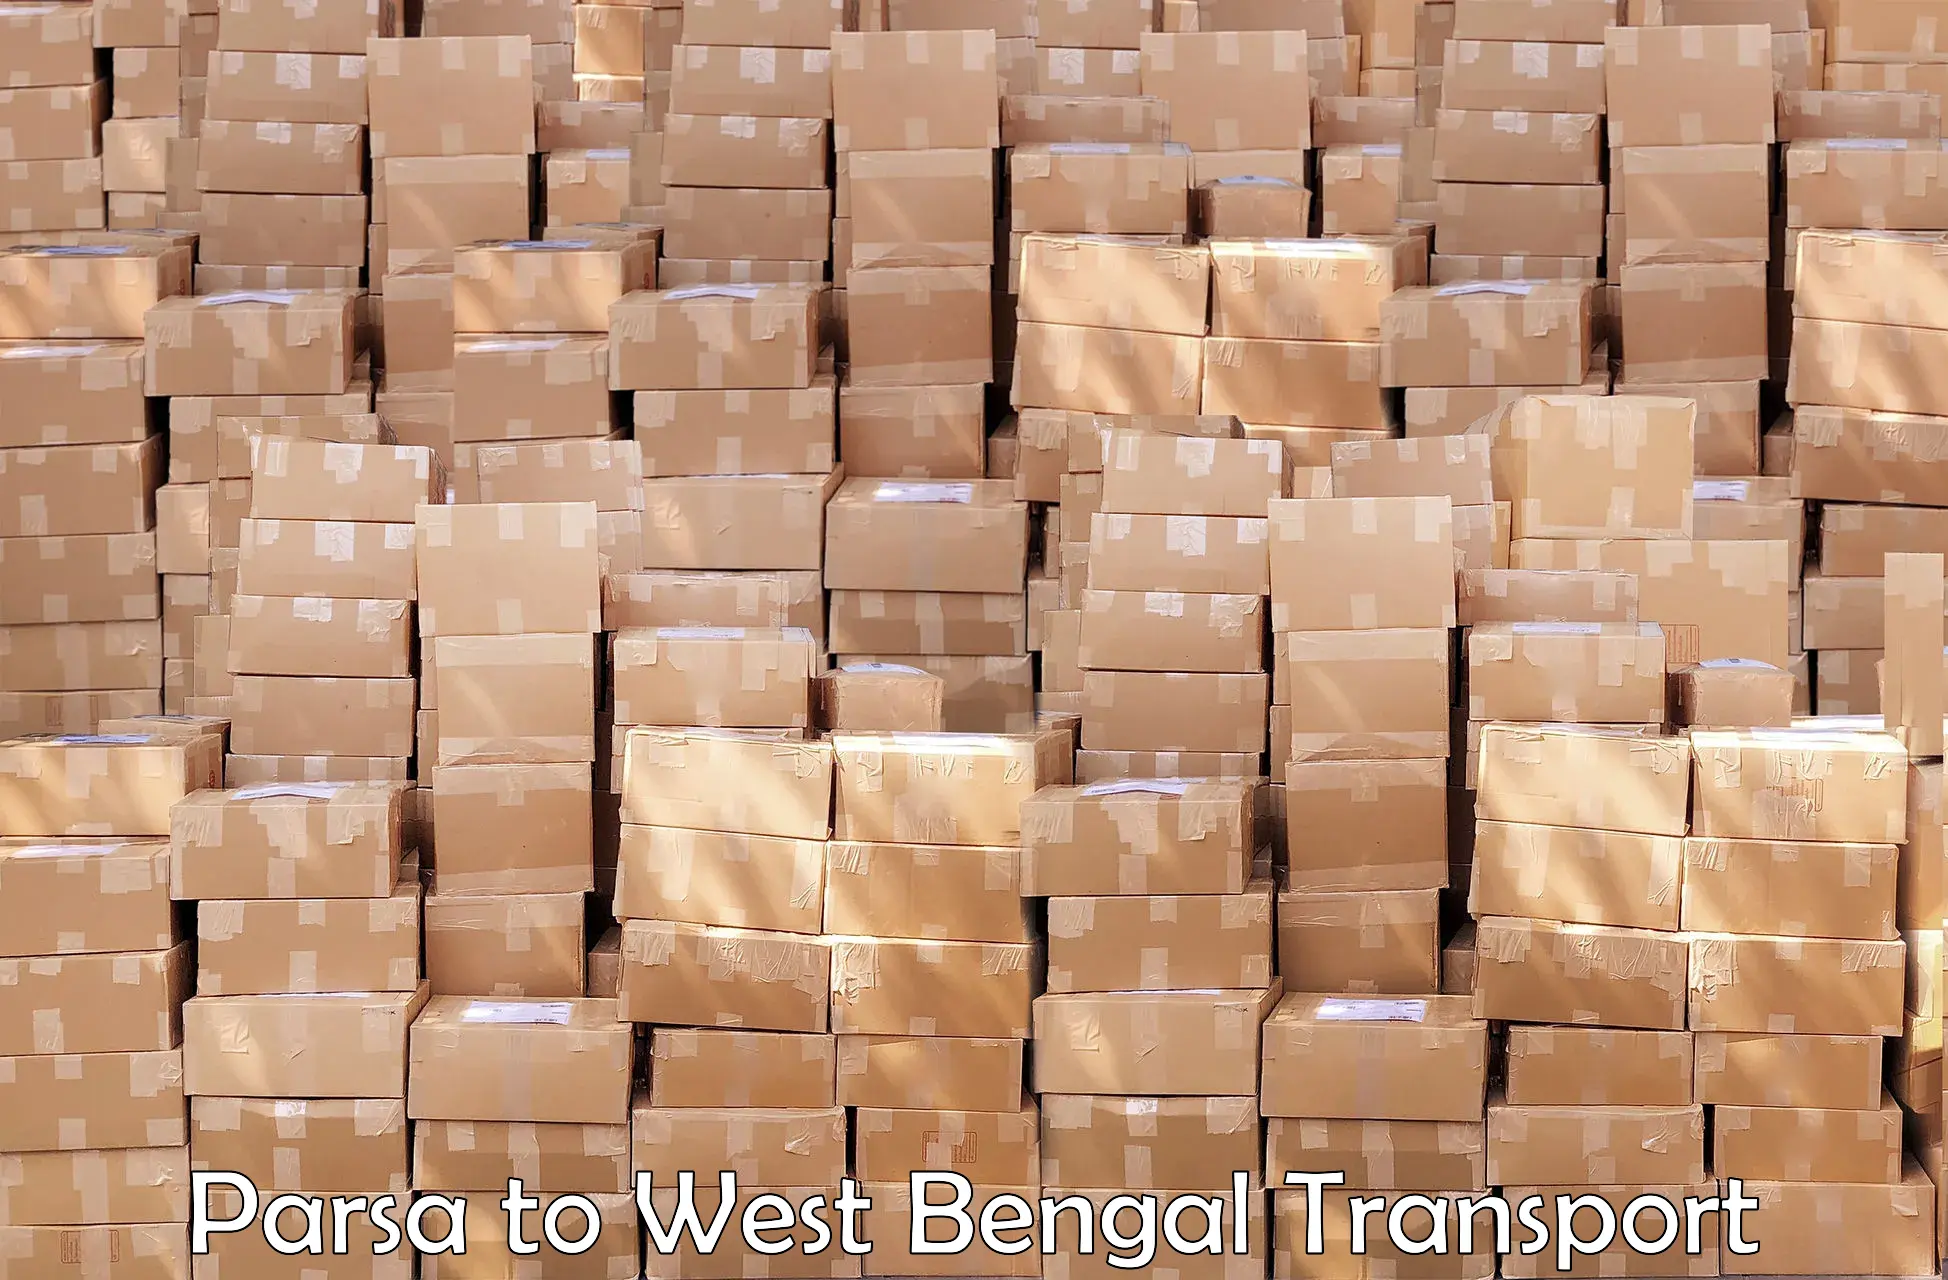 Nearby transport service Parsa to West Bengal